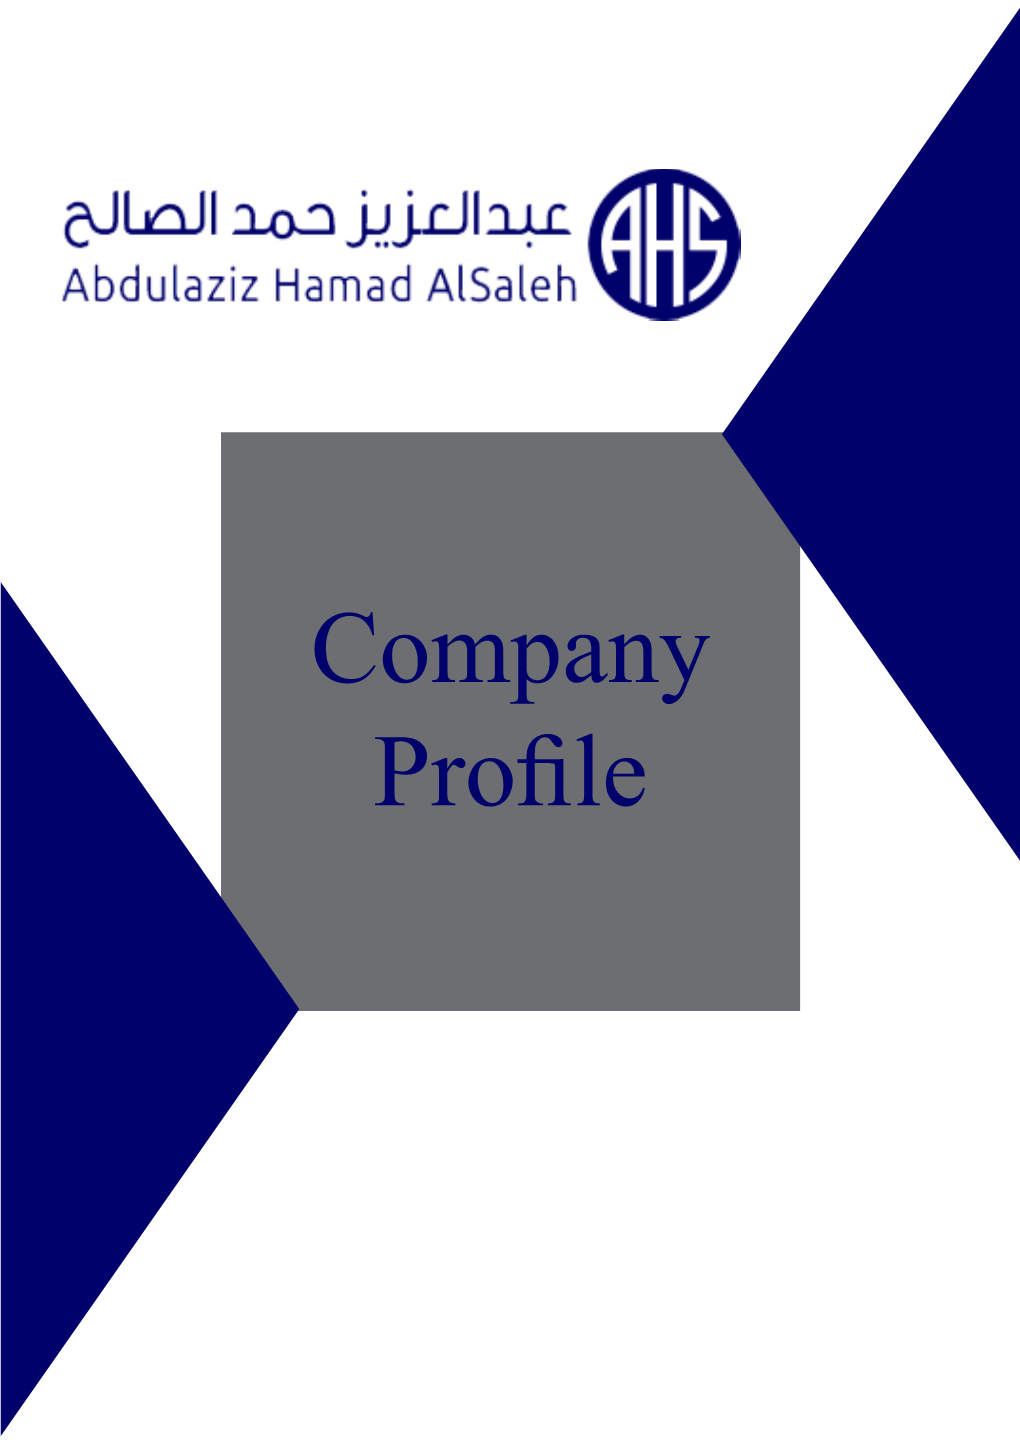 Company Profile CONTENTS 04 About Us